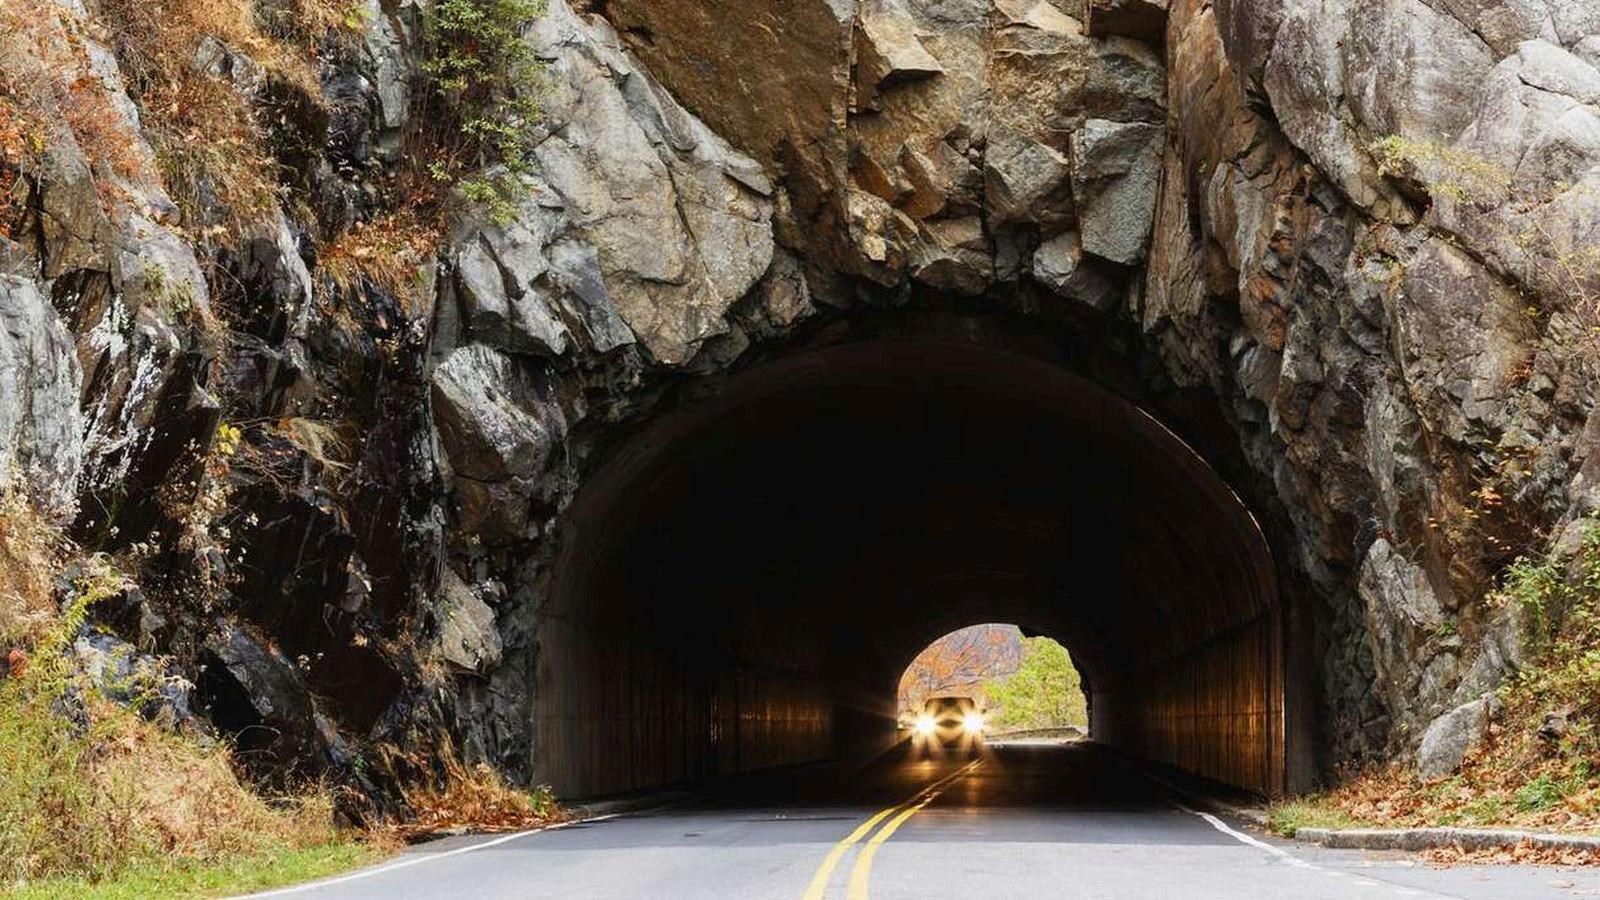 A tunnel cut into the mountain with trees on top of the rock tunnel exterior and a car\'s headlights 